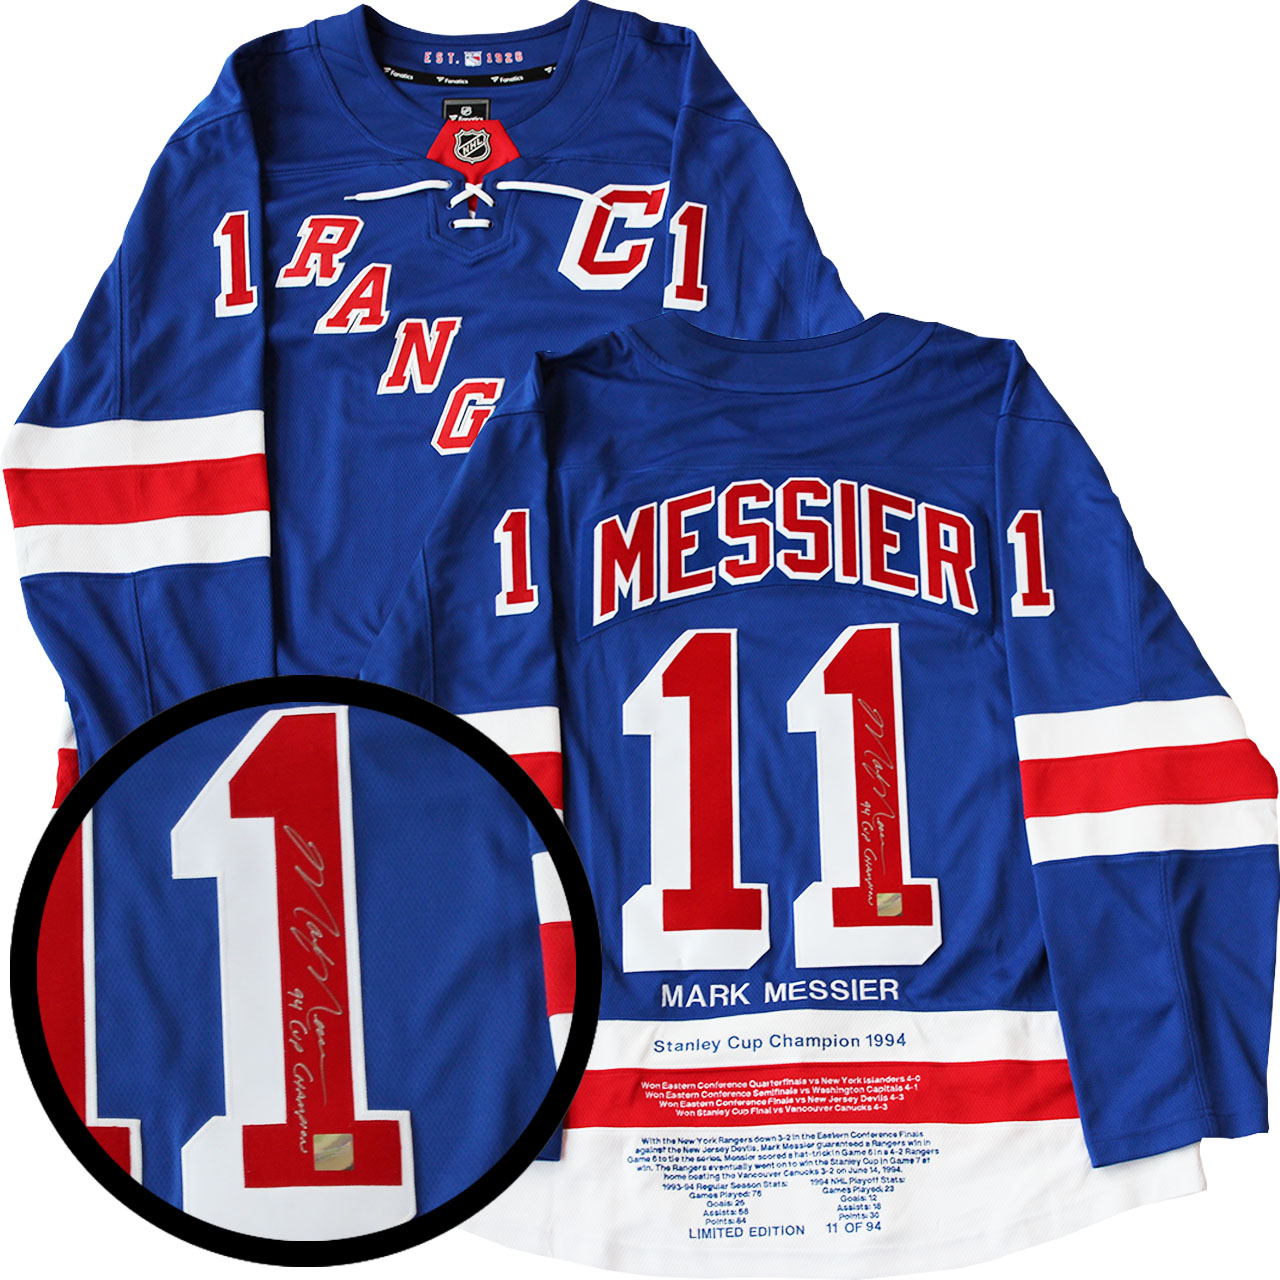 Mark Messier autographed (New York Rangers) Jersey